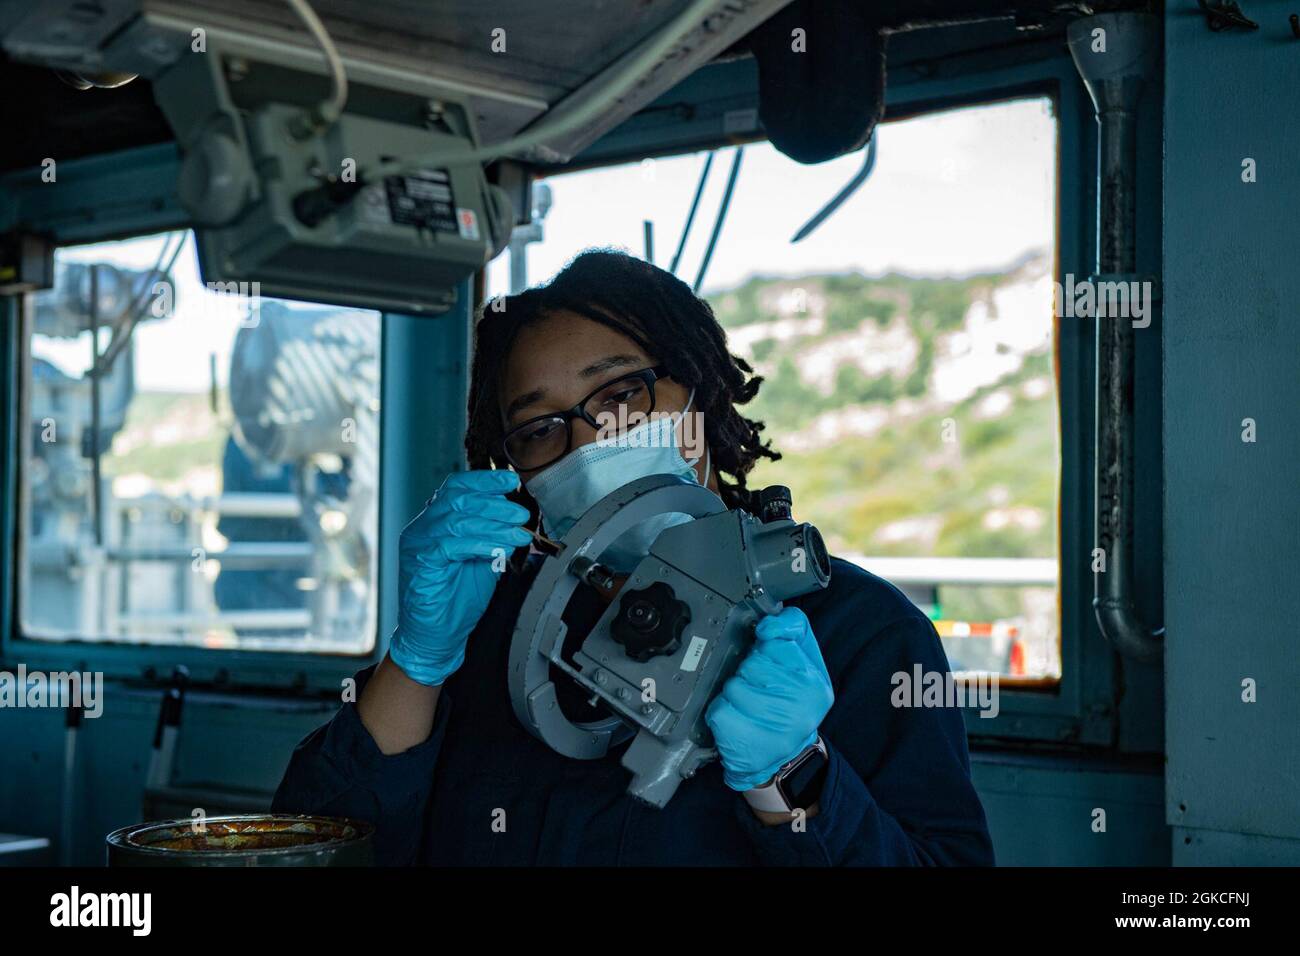 210312-N-WQ732-5007 SOUDA BAY, Greece (March 12, 2021) Quartermaster 3rd Class Pashawn Hunt, from Franklin, Virginia, greases a telescopic alidade aboard the Ticonderoga-class guided-missile cruiser USS Monterey (CG 61), March 12, 2021.  Monterey is operating with the Ike Carrier Strike Group on a routine deployment in the U.S. Sixth Fleet area of operations in support of U.S. national interests and security in Europe and Africa. Stock Photo